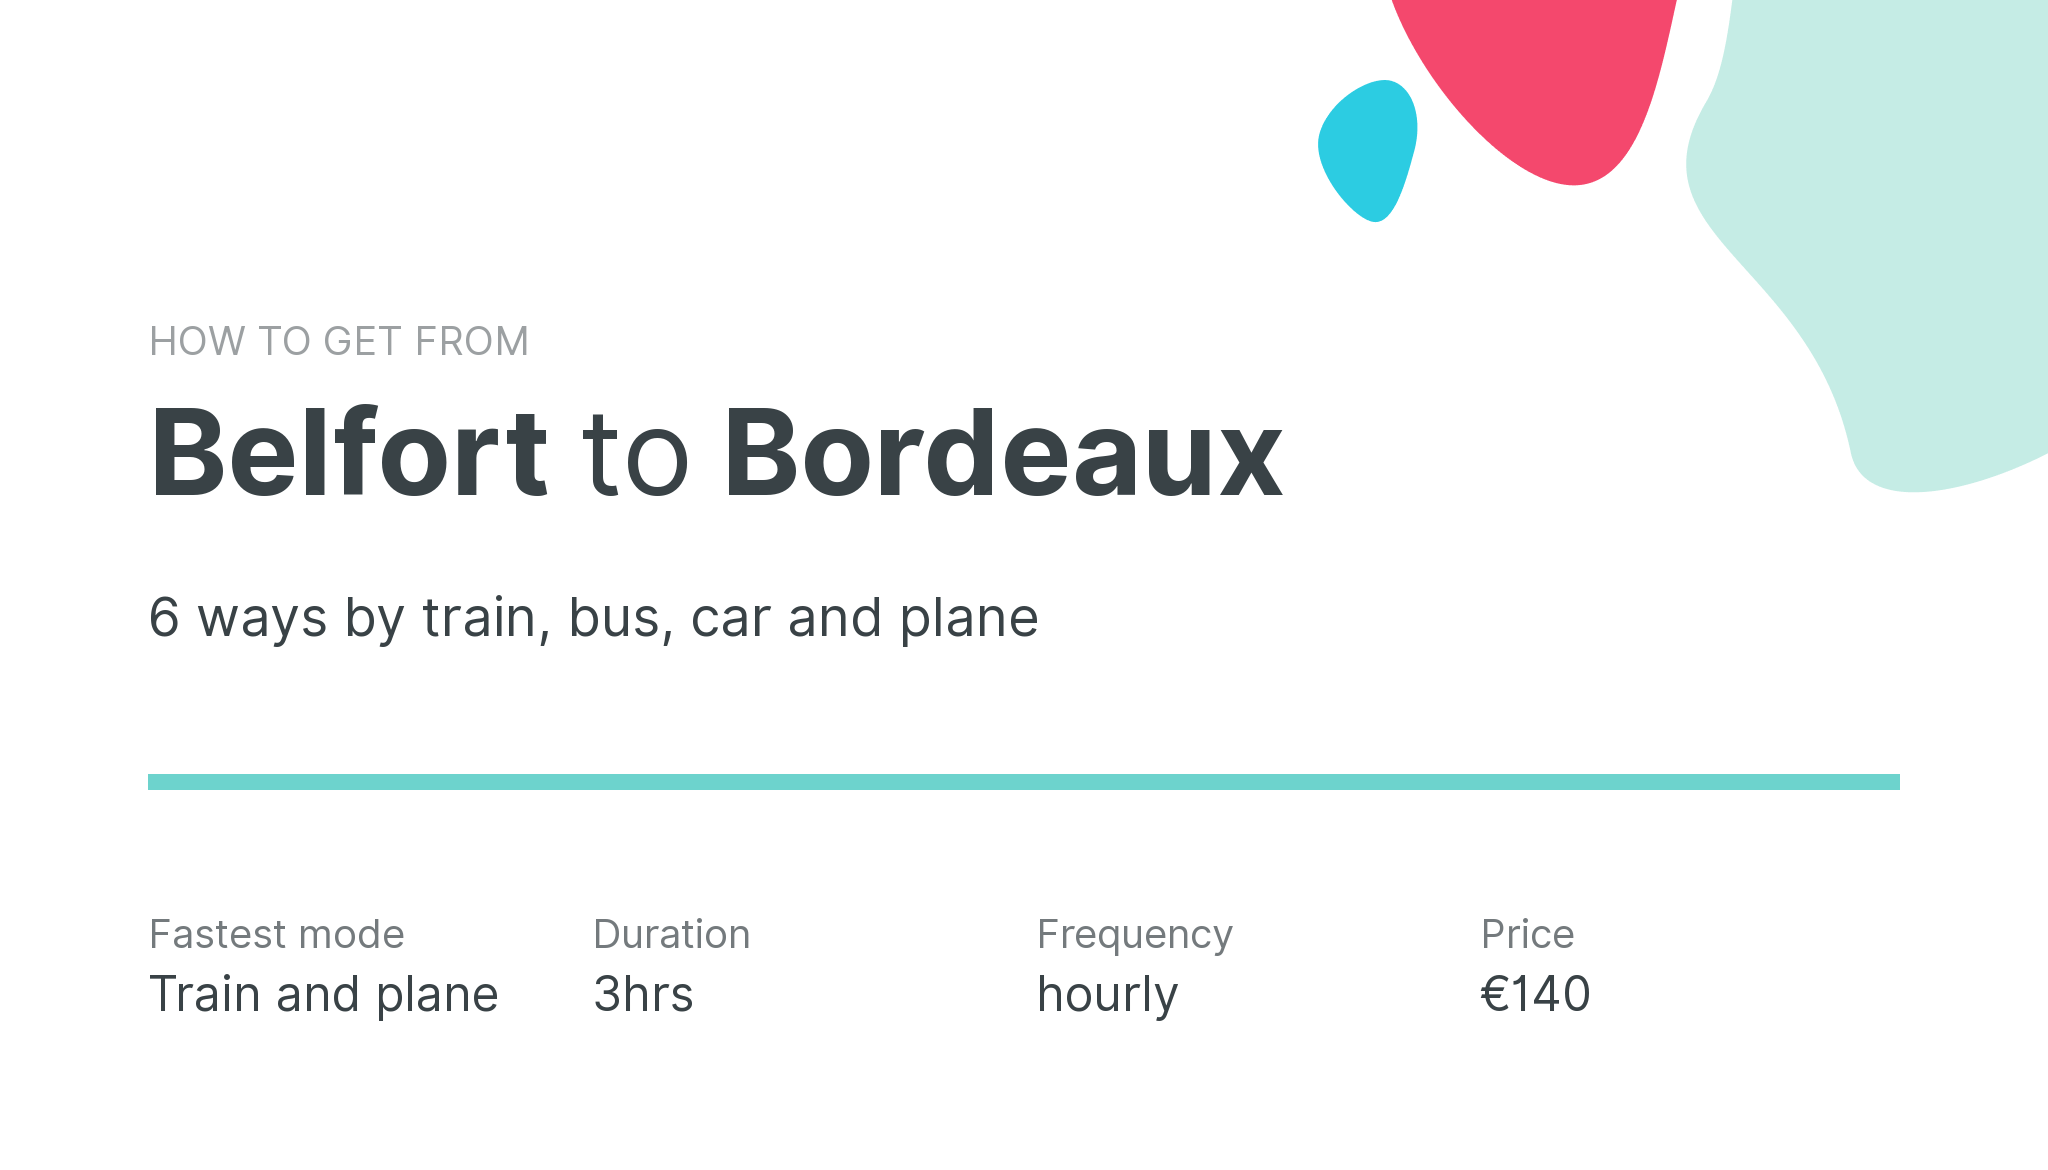 How do I get from Belfort to Bordeaux